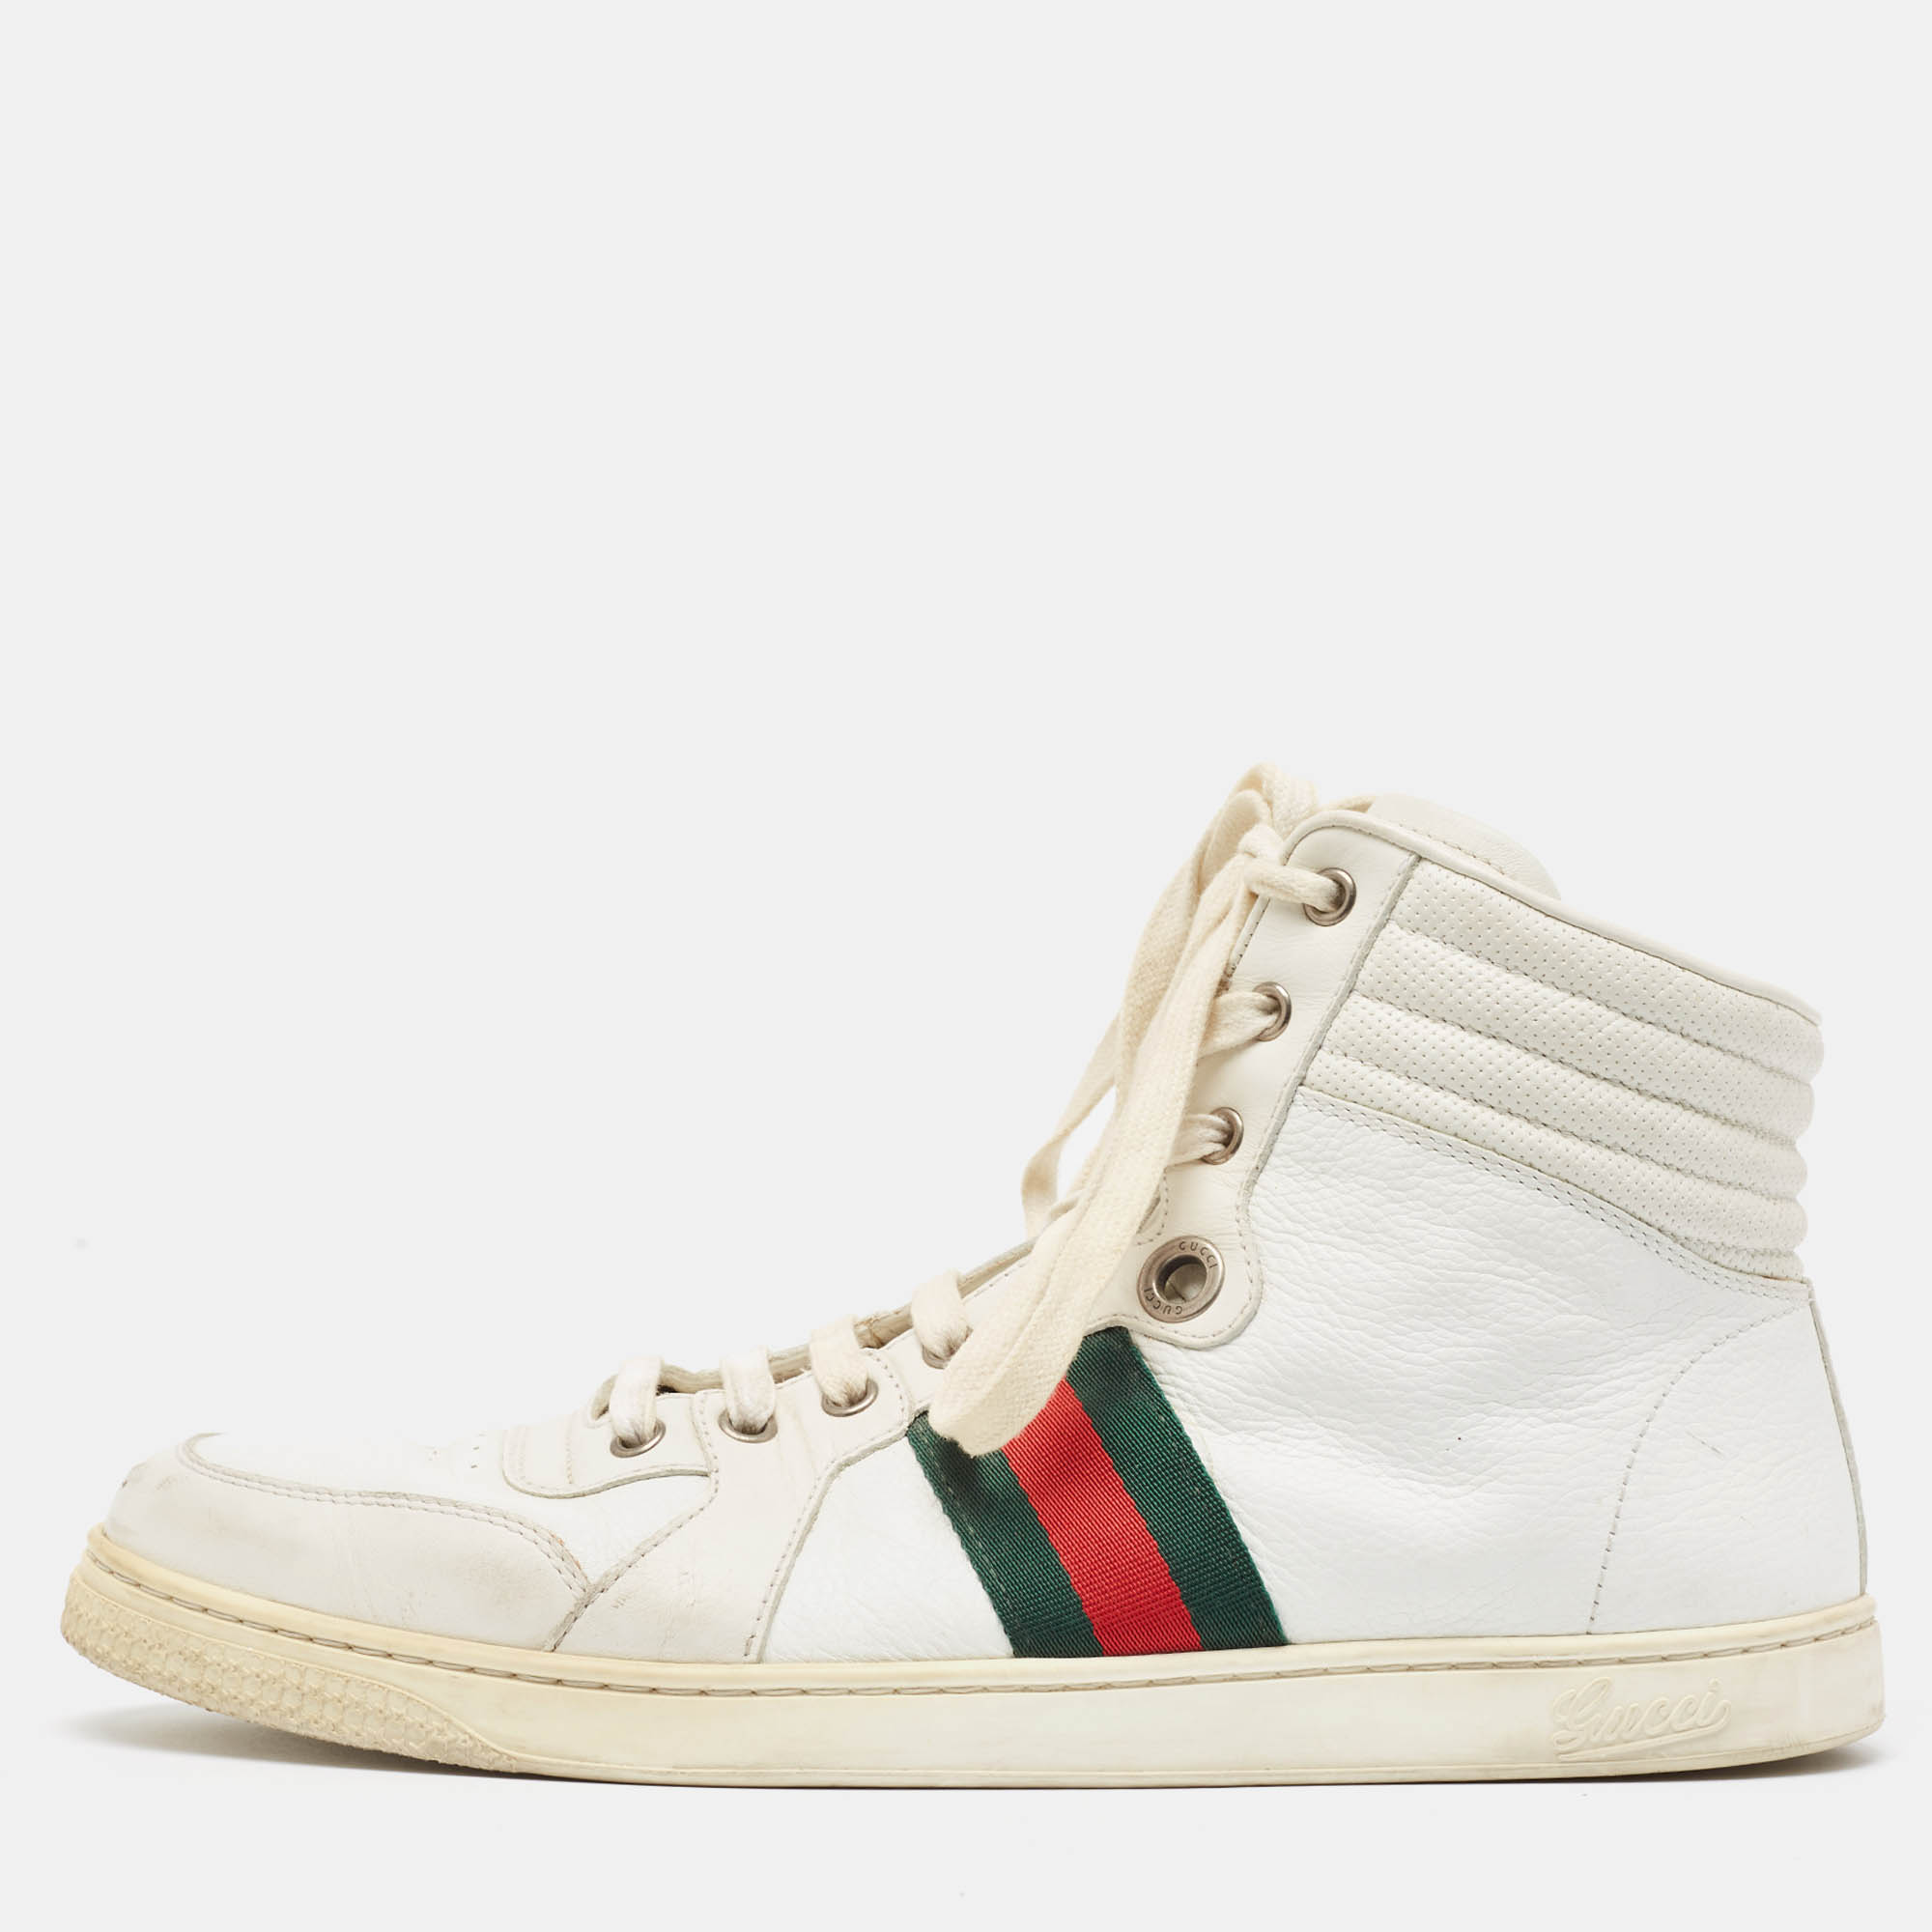 Pre-owned Gucci White Leather Web Detail High Top Sneakers Size 43